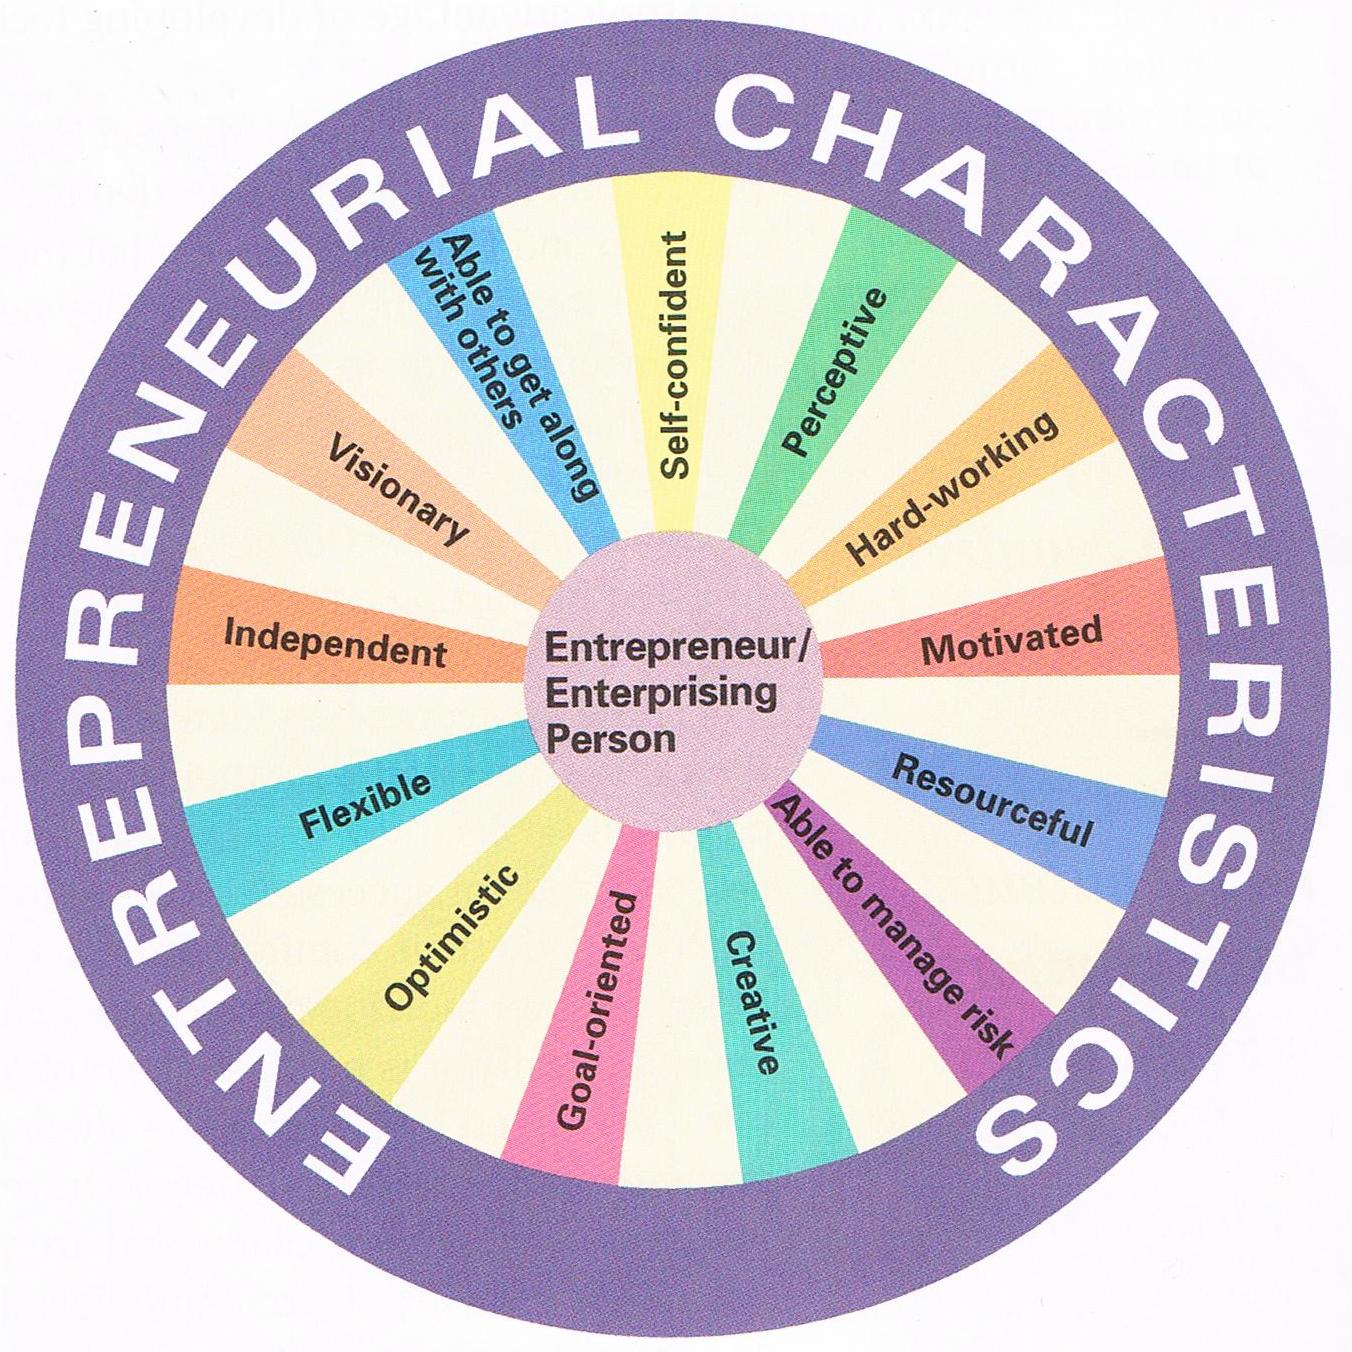 The characteristics of a successful entrepreneur is what sets one 